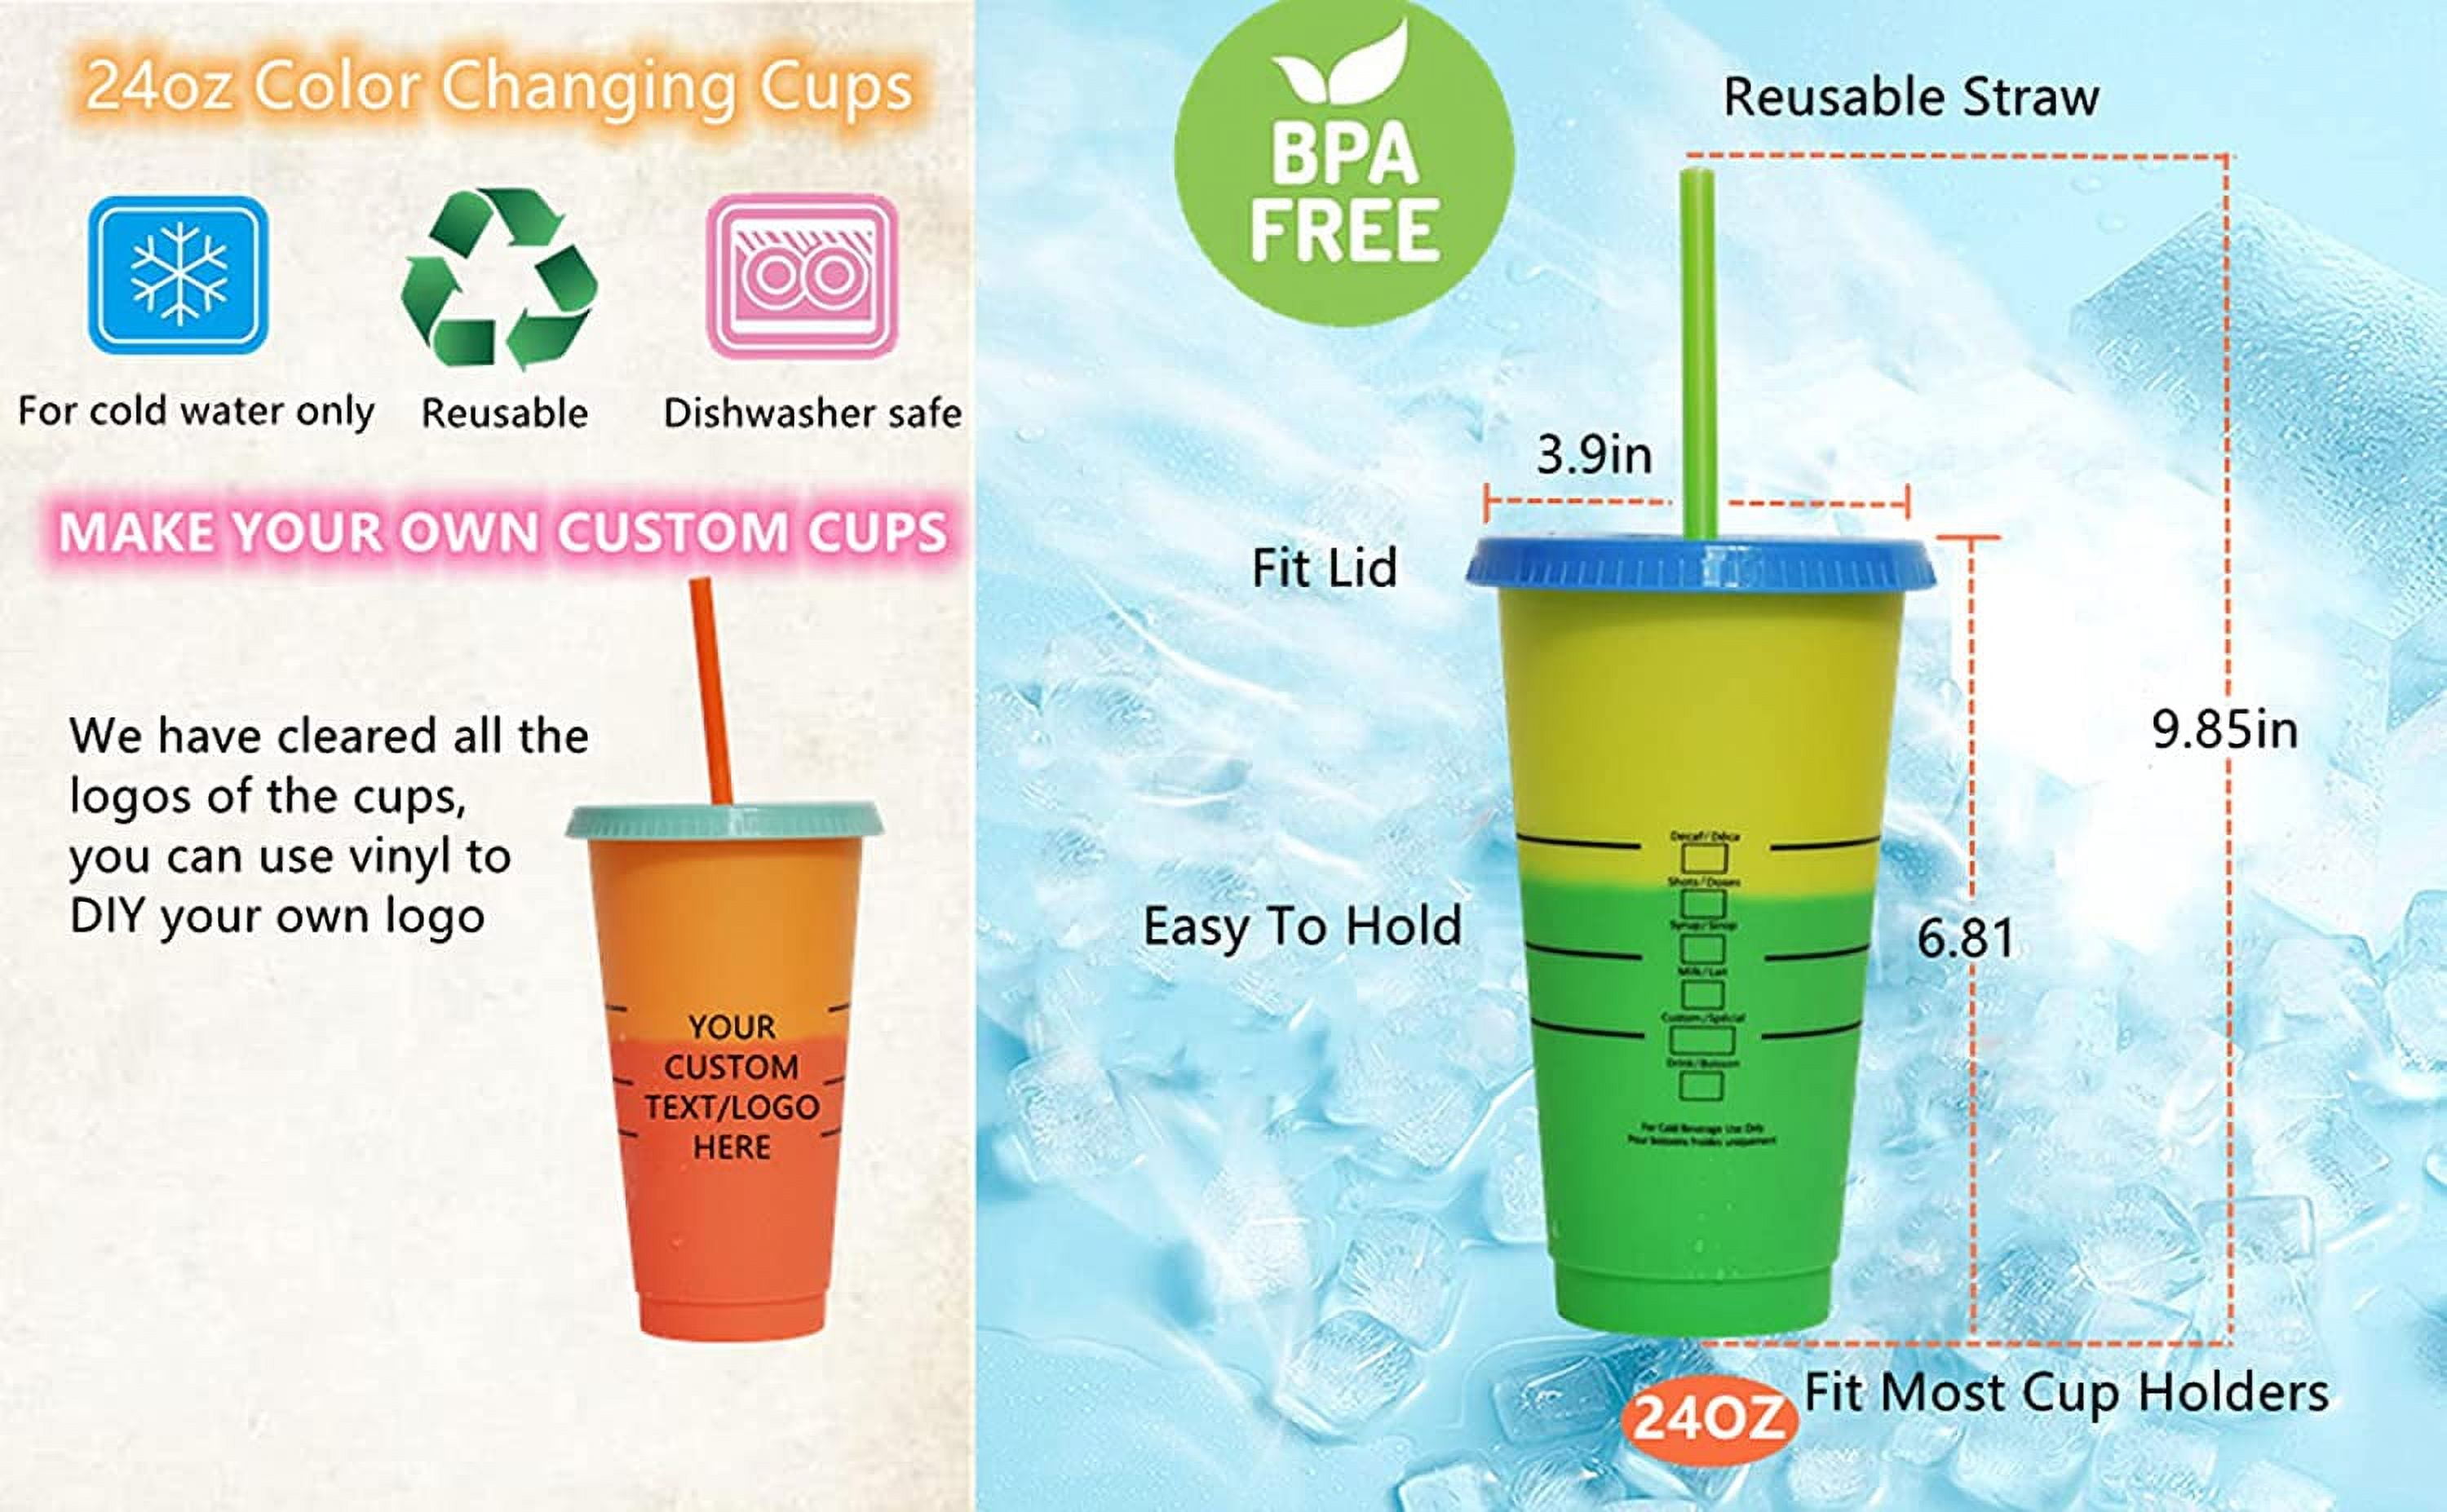 Drink Change Color Straw Mugs With Lid Plastic Tumbler Matte Coffe Bottle  Cup